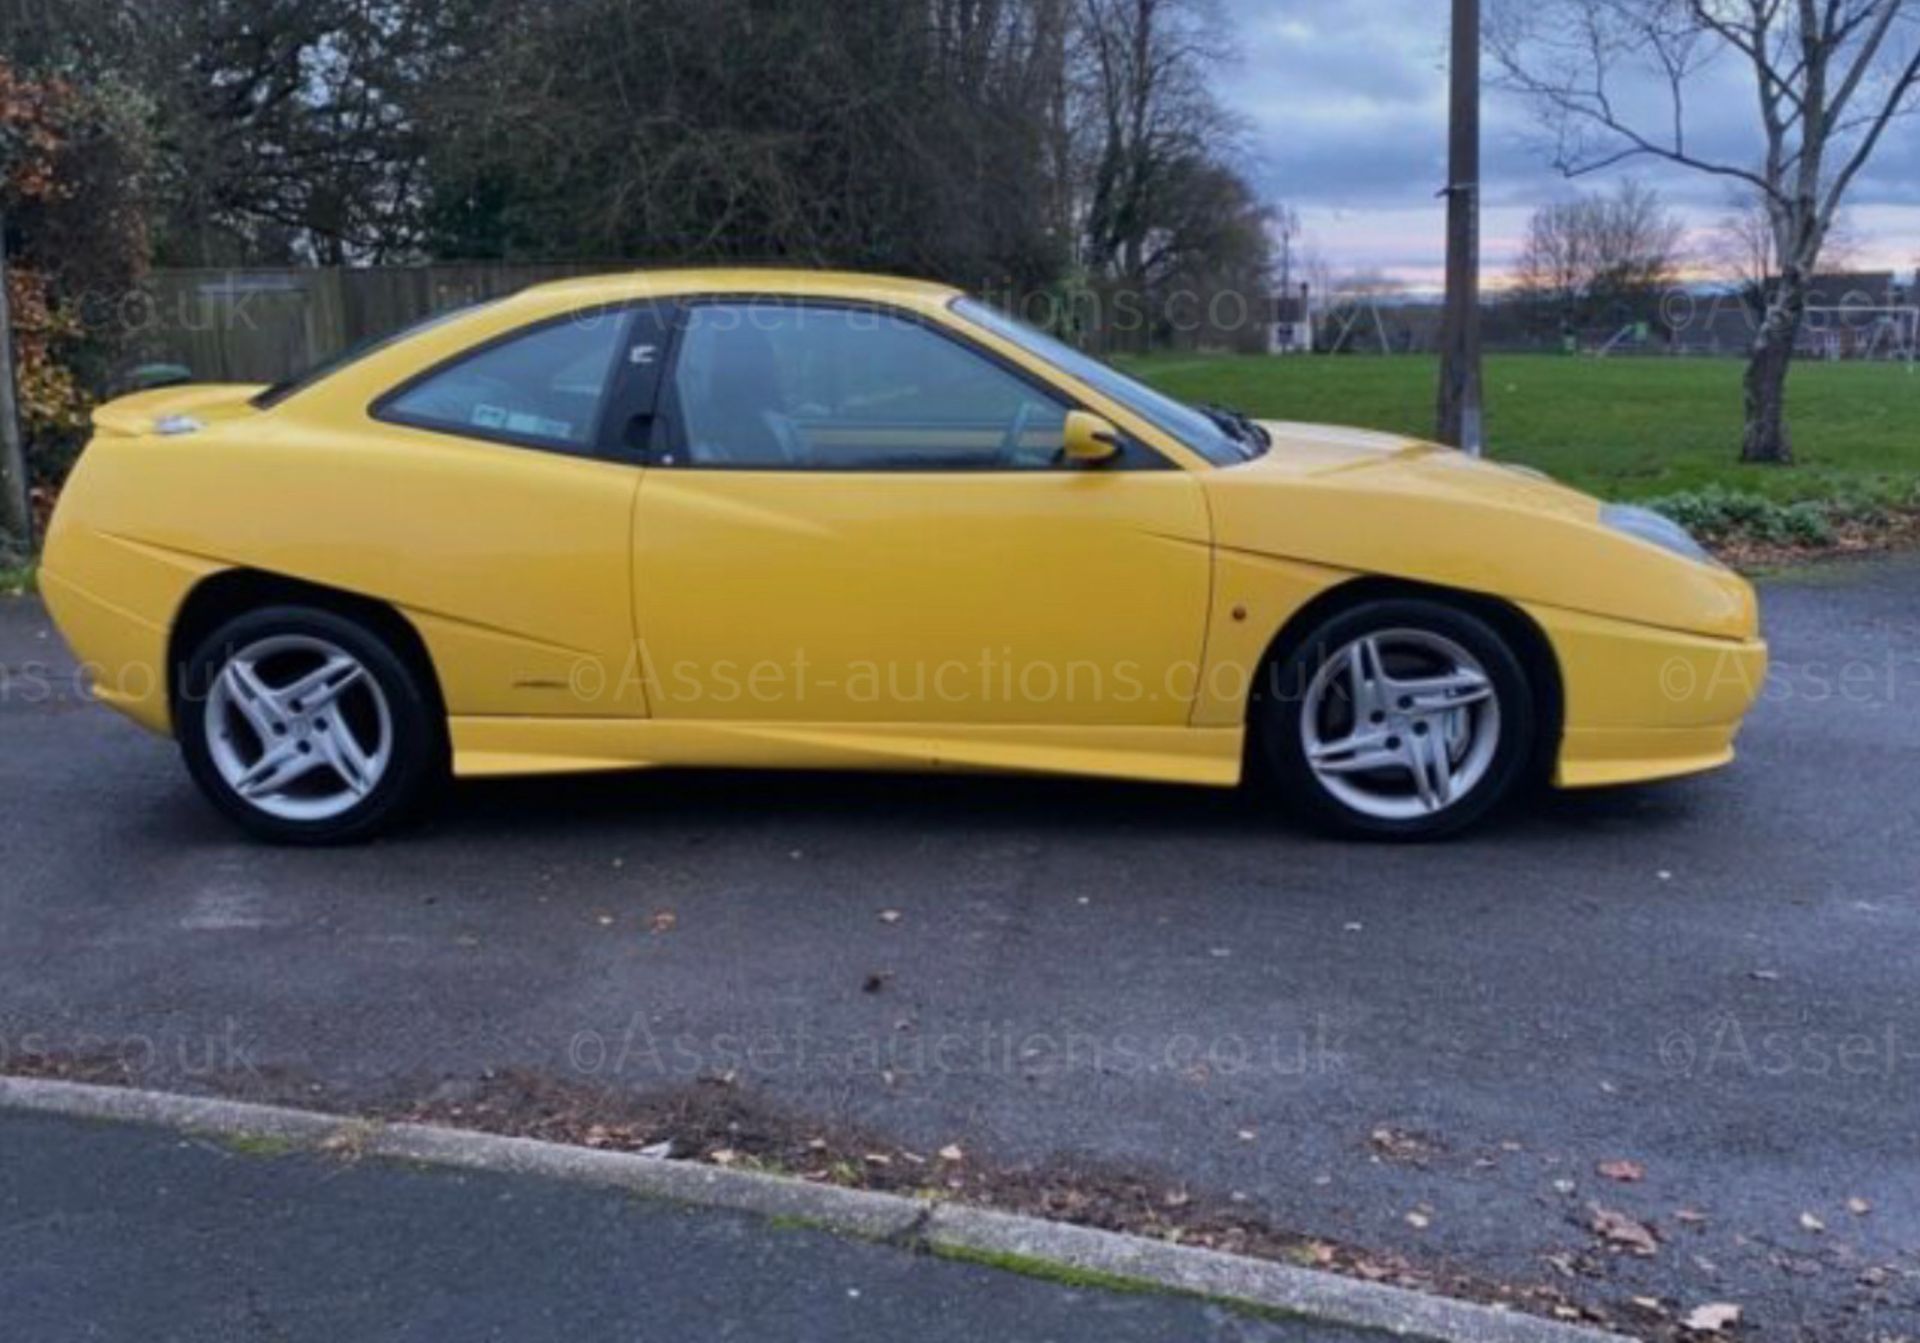 1996 FIAT COUPE 20V TURBO YELLOW SALOON, 2.0 PETROL ENGINE, SHOWING 95K MILES *NO VAT* - Image 8 of 12